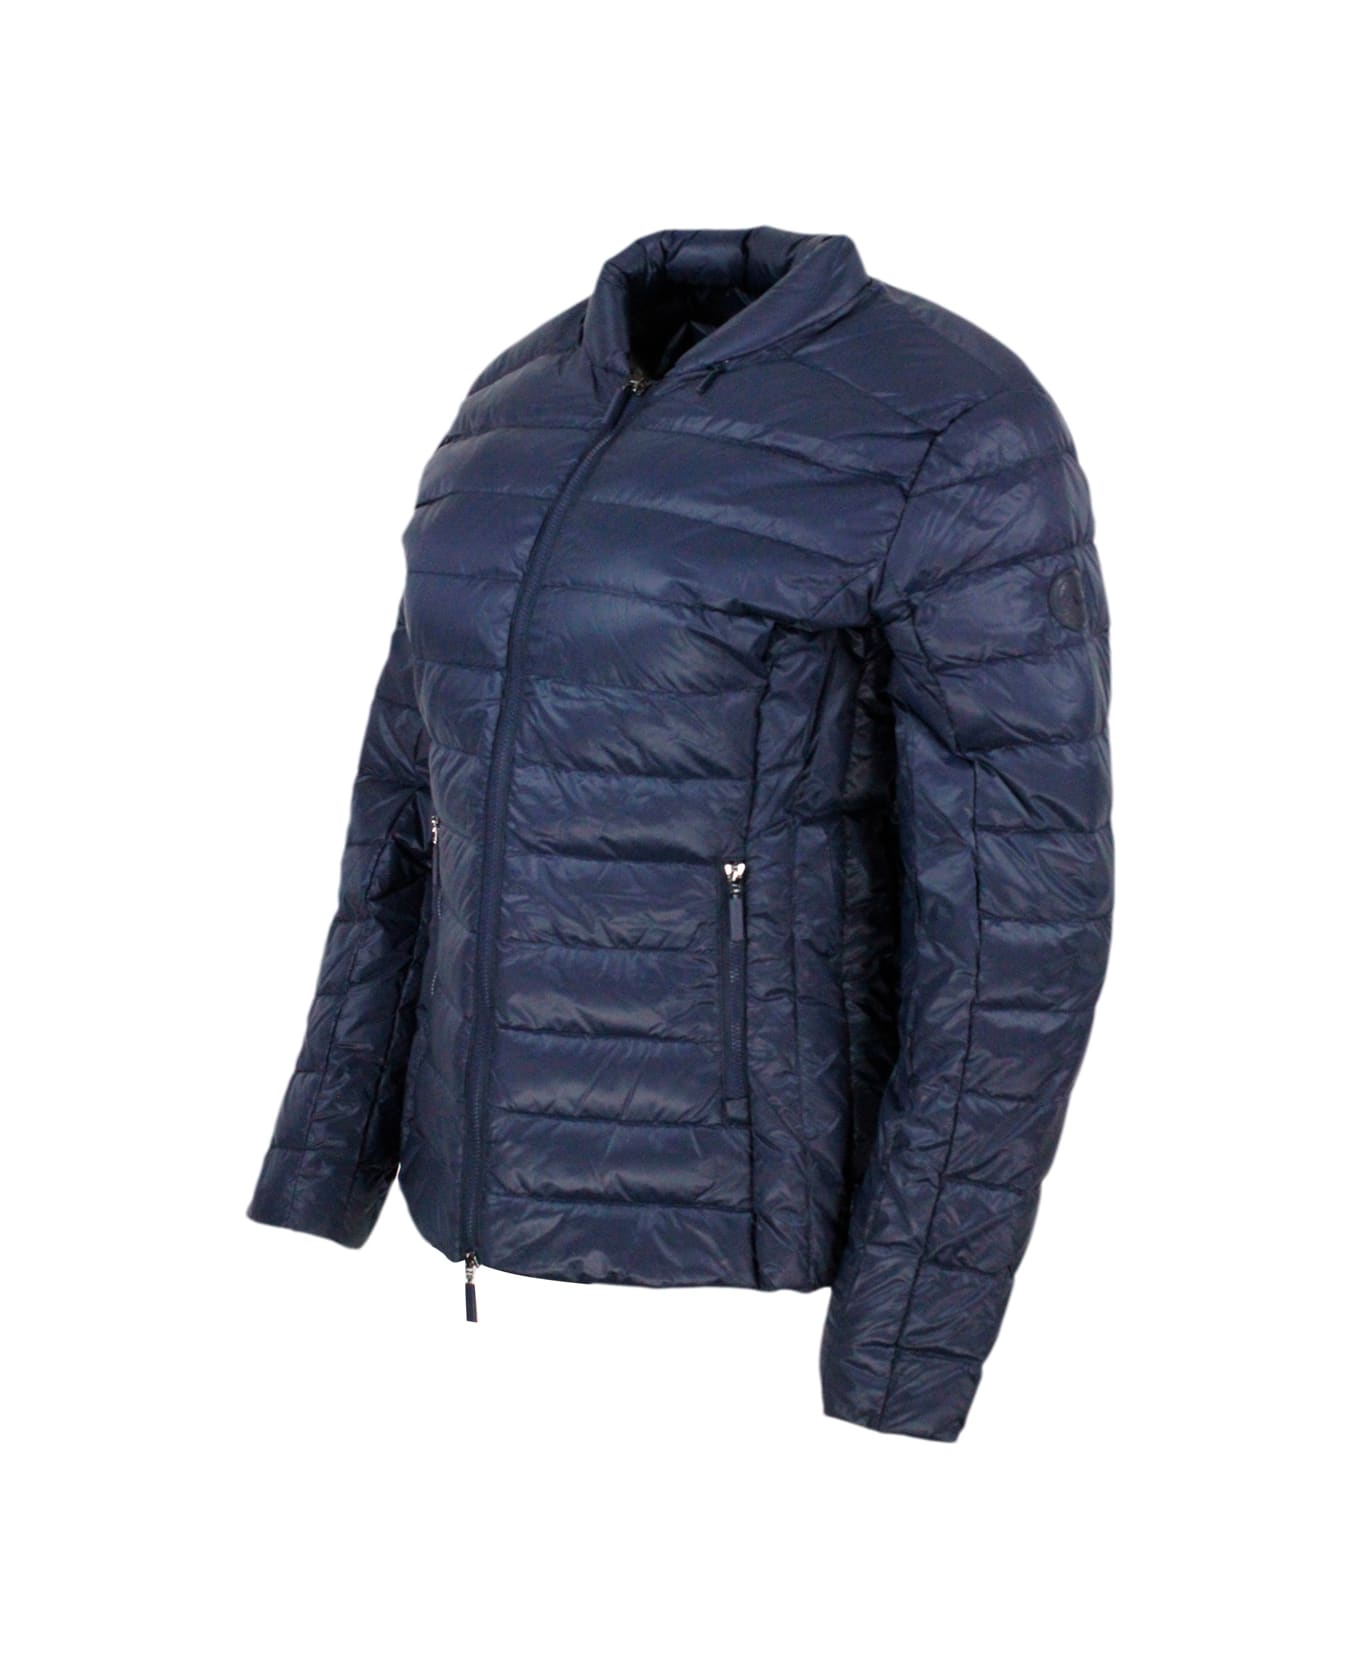 Armani Collezioni Lightweight 100 Gram Slim Down Jacket With Integrated Concealed Hood And Zip Closure - Blu